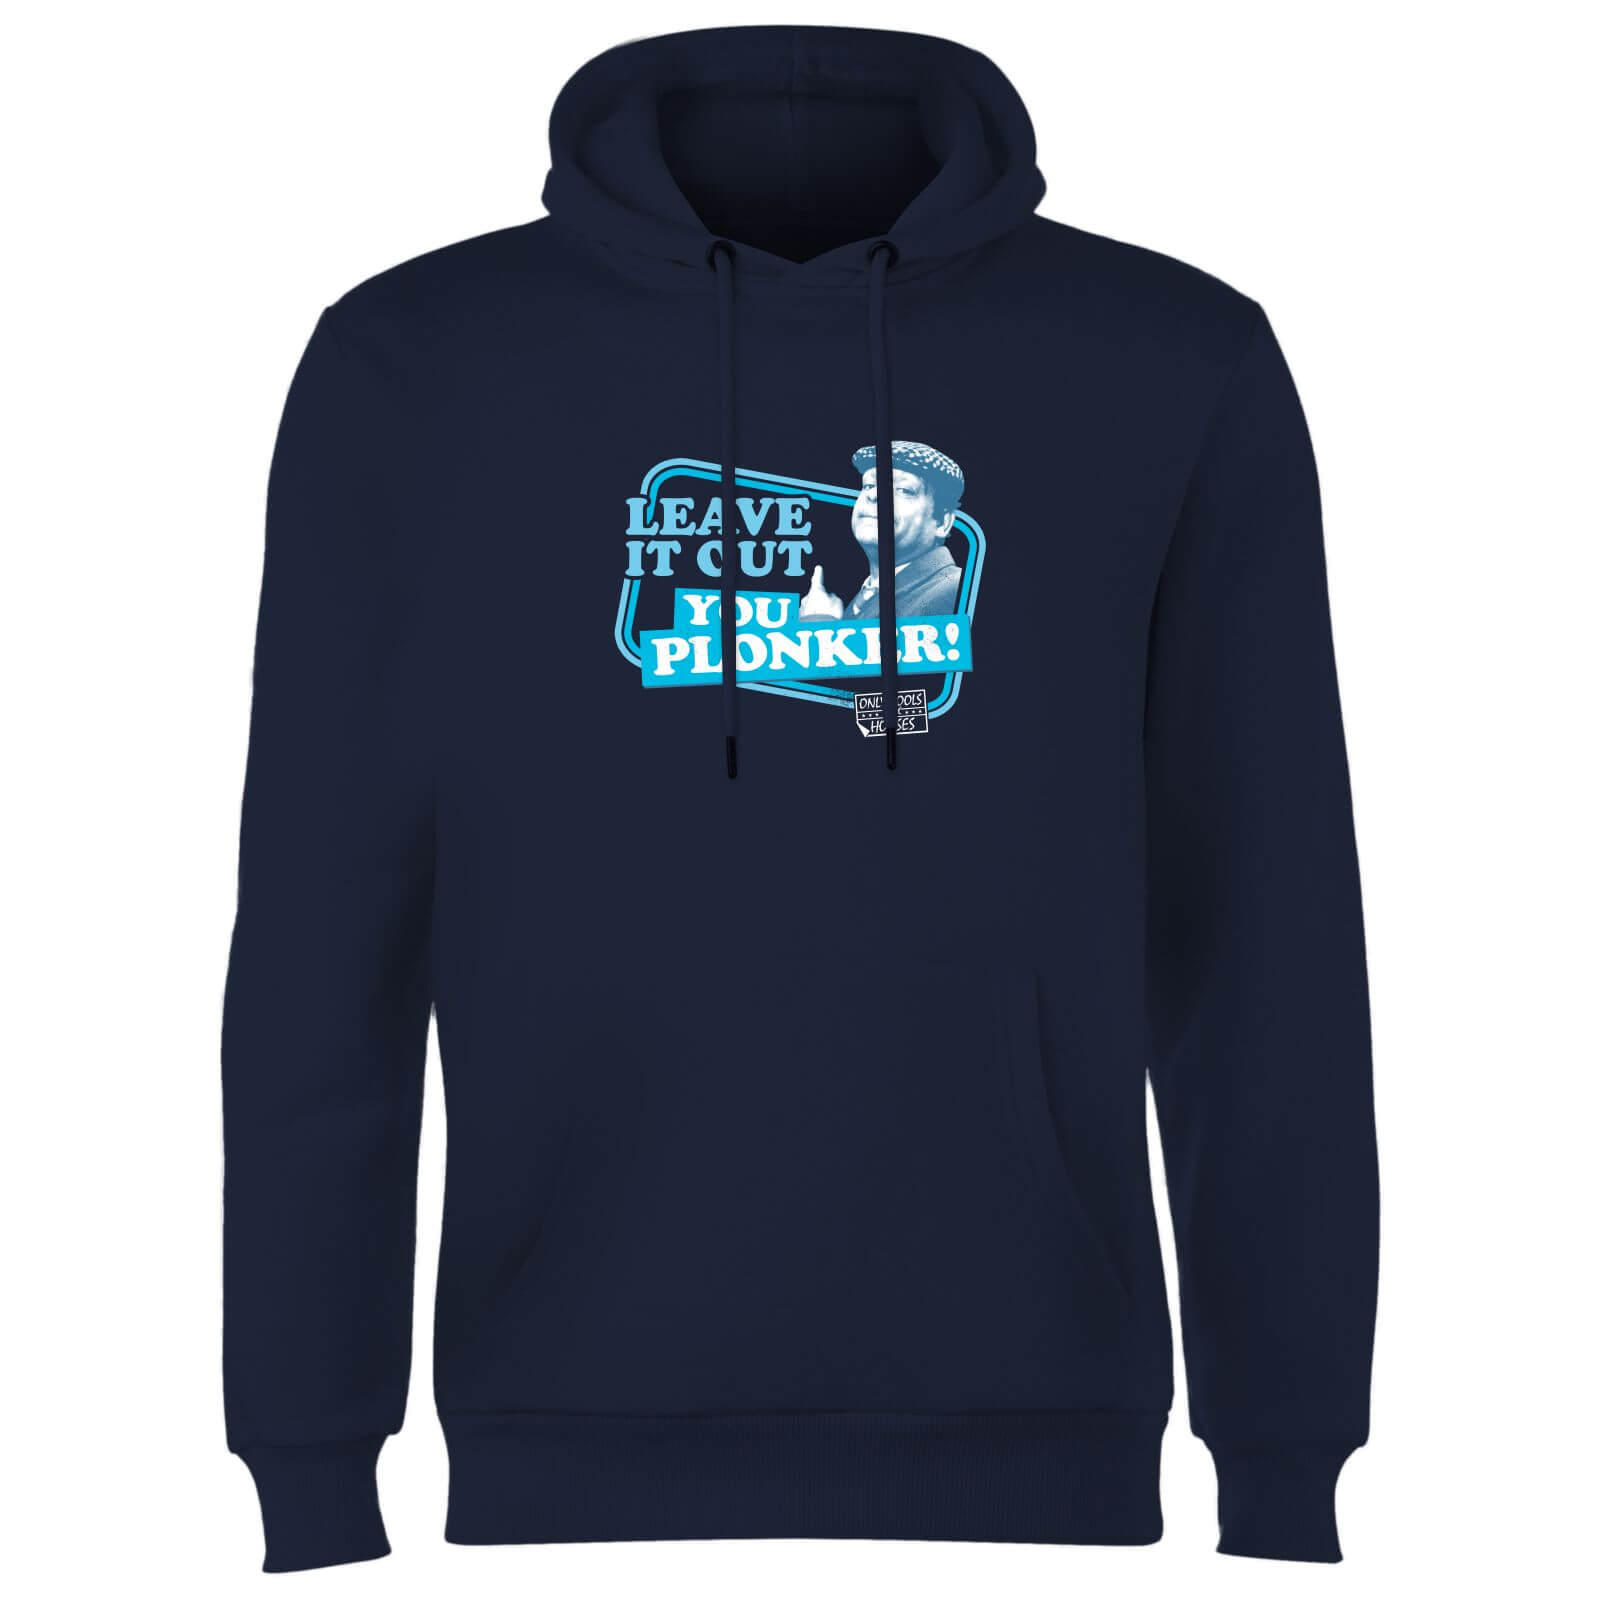 Only Fools And Horses Leave It Out You Plonker! Hoodie - Navy - S